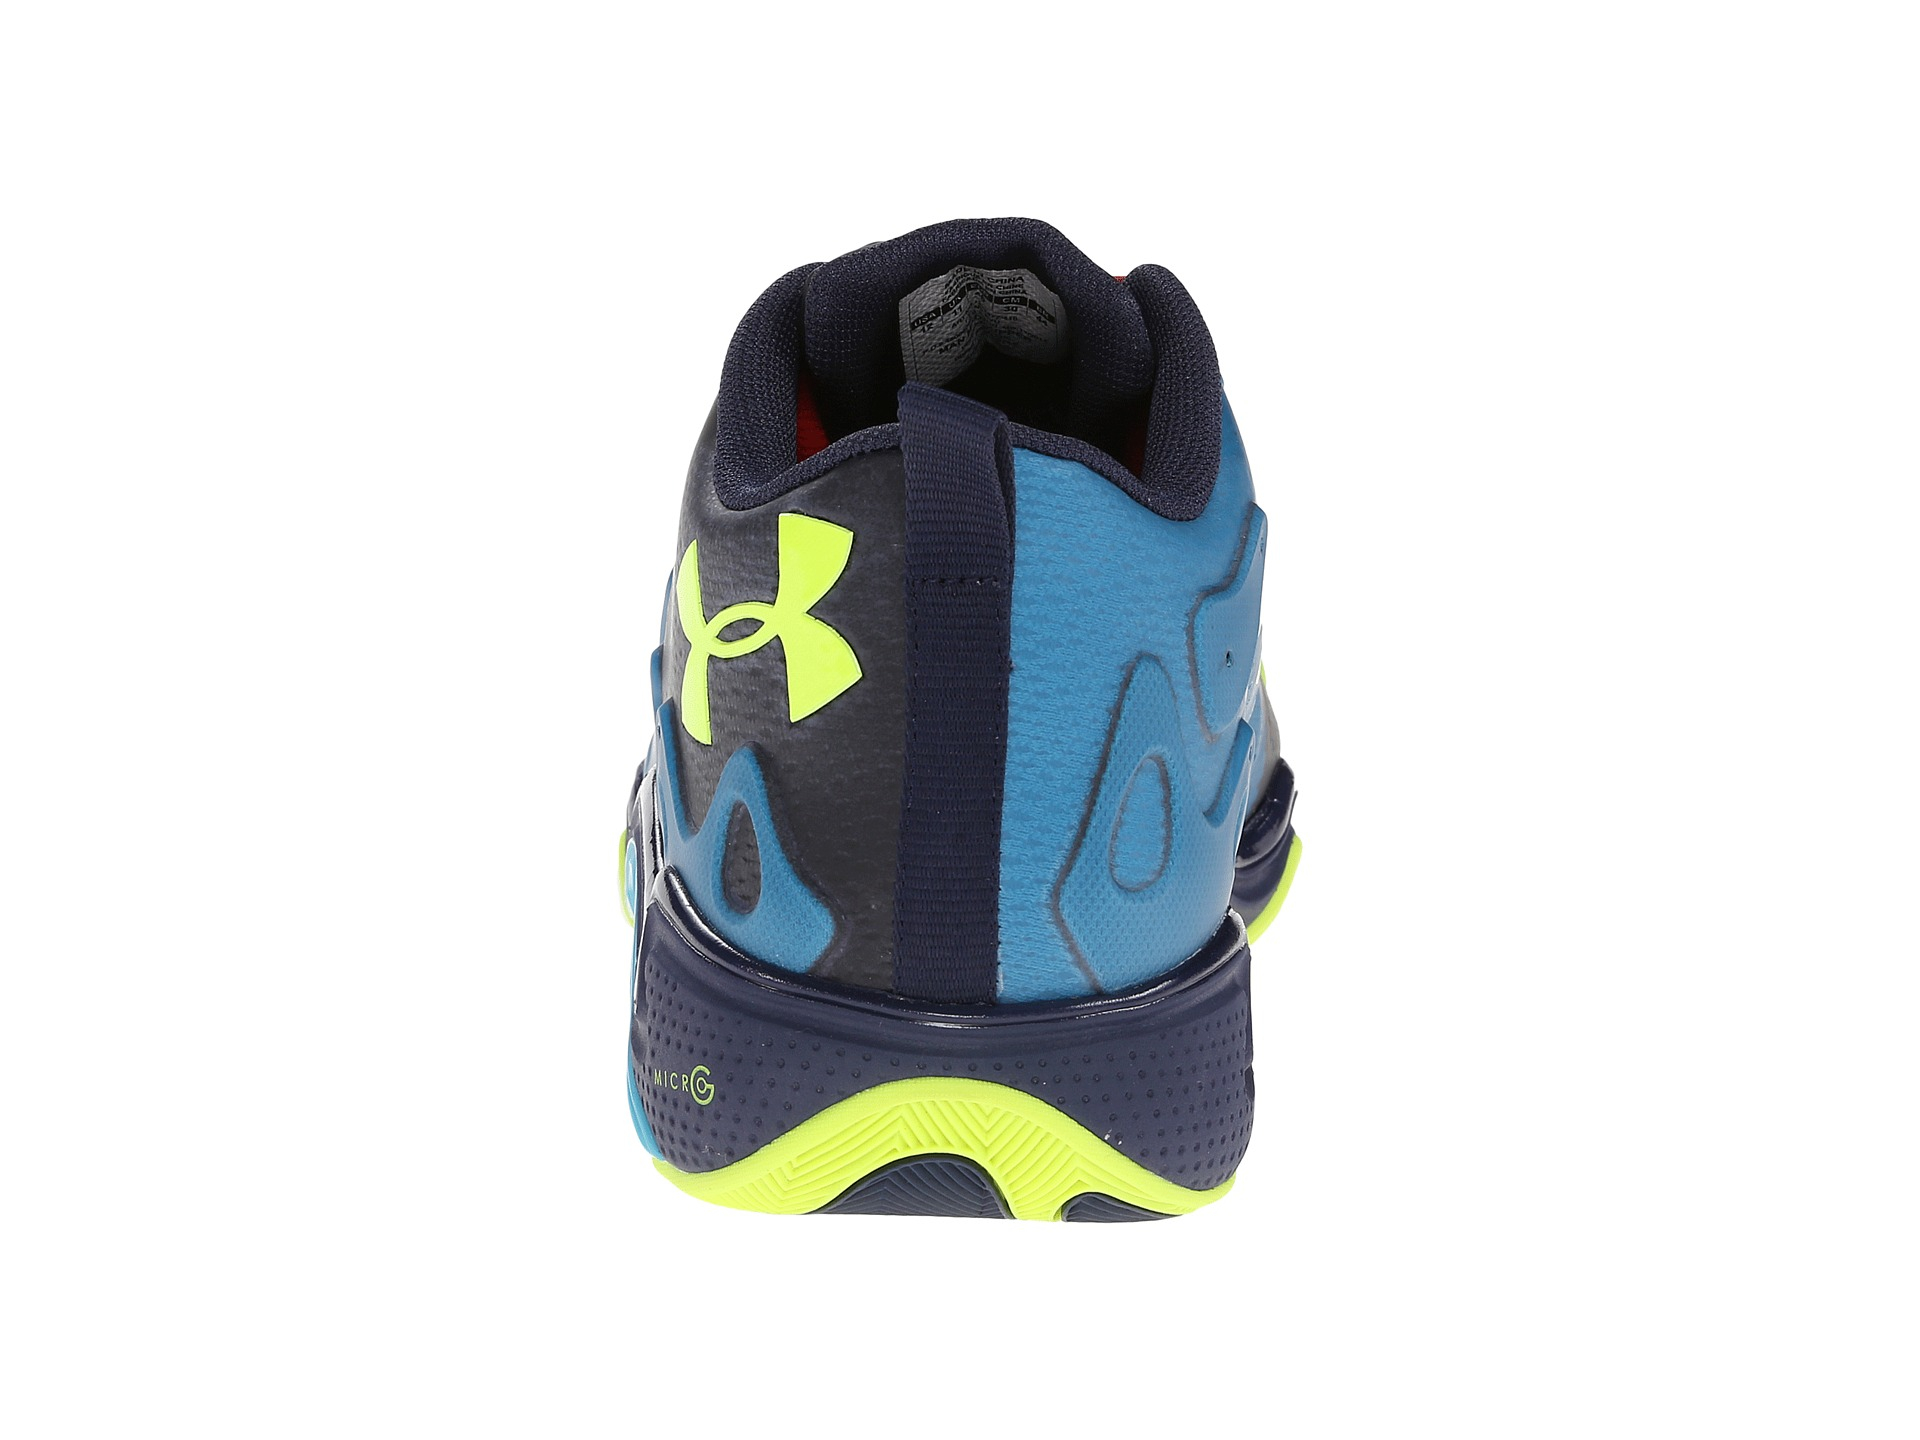 Under Armour Rubber Ua Micro G™ Anatomix Spawn 2 Low in ...